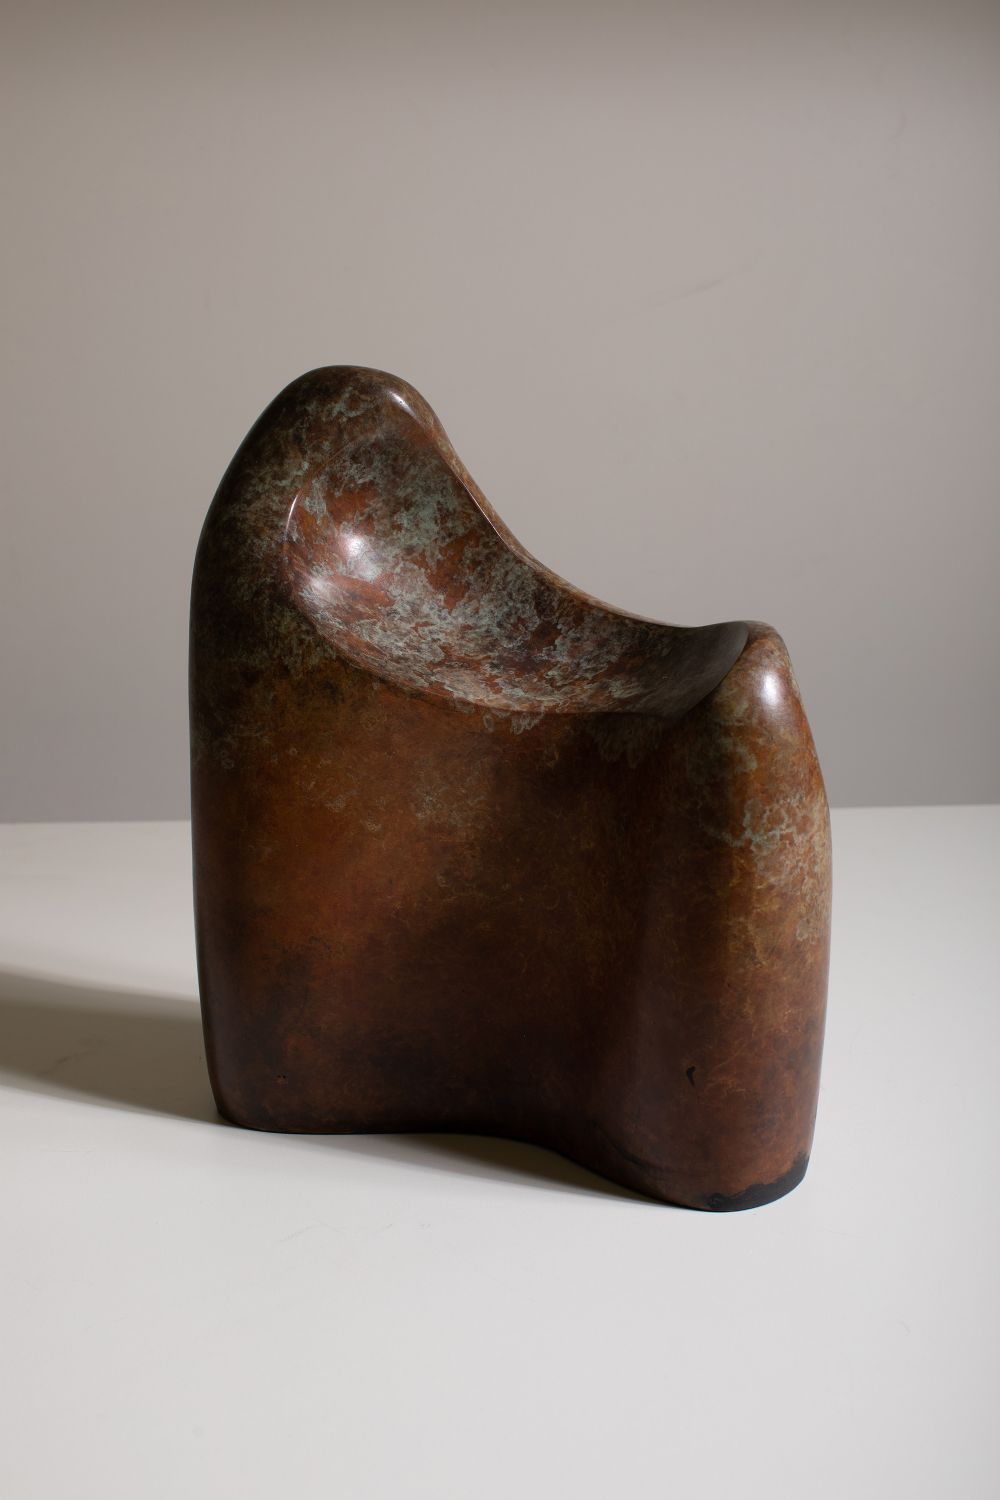 MOVING FORM by Sonja Landweer sold for €3,400 at deVeres Auctions